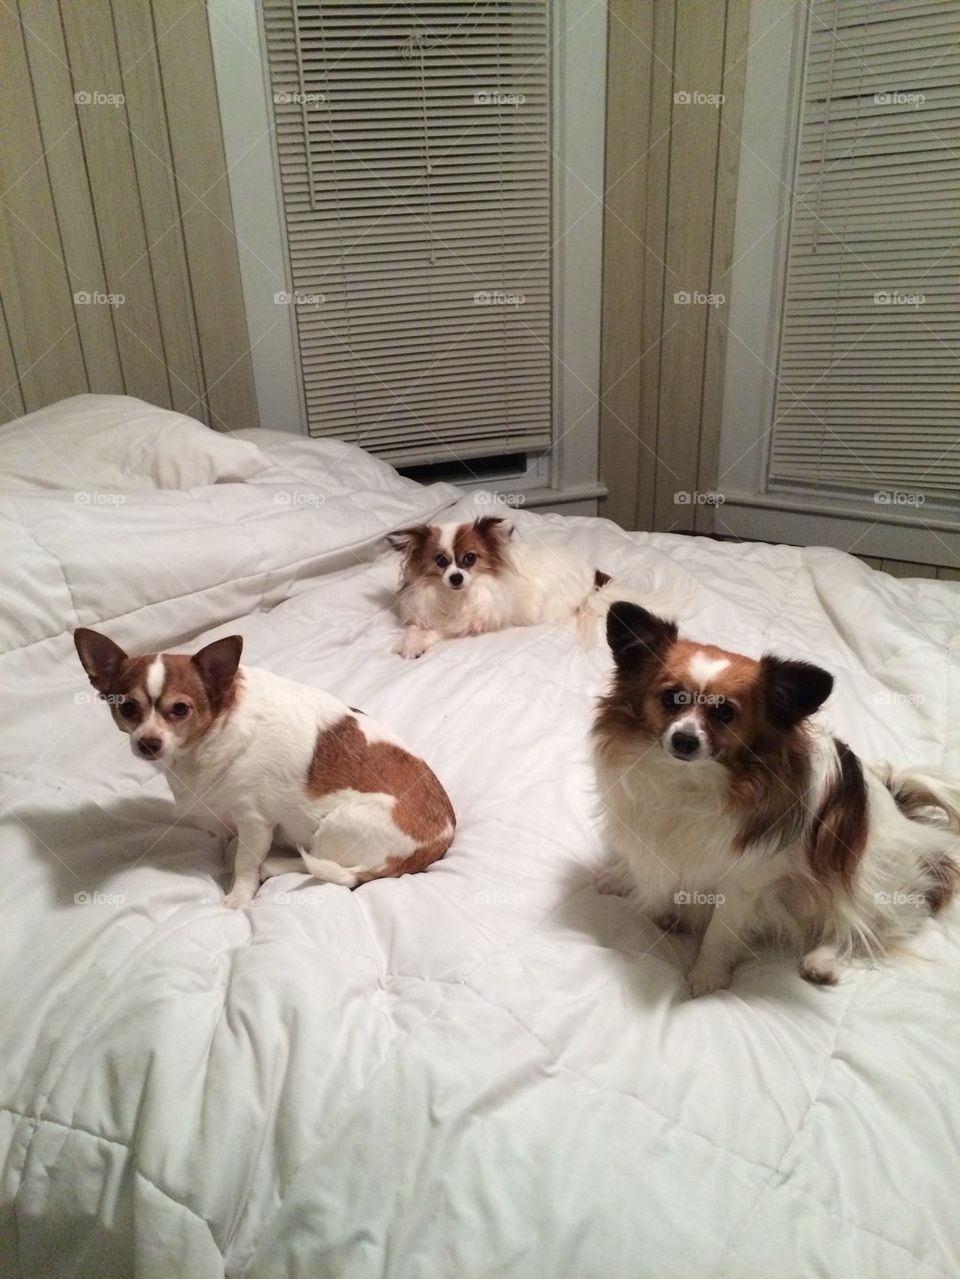 Bedtime with the puppies